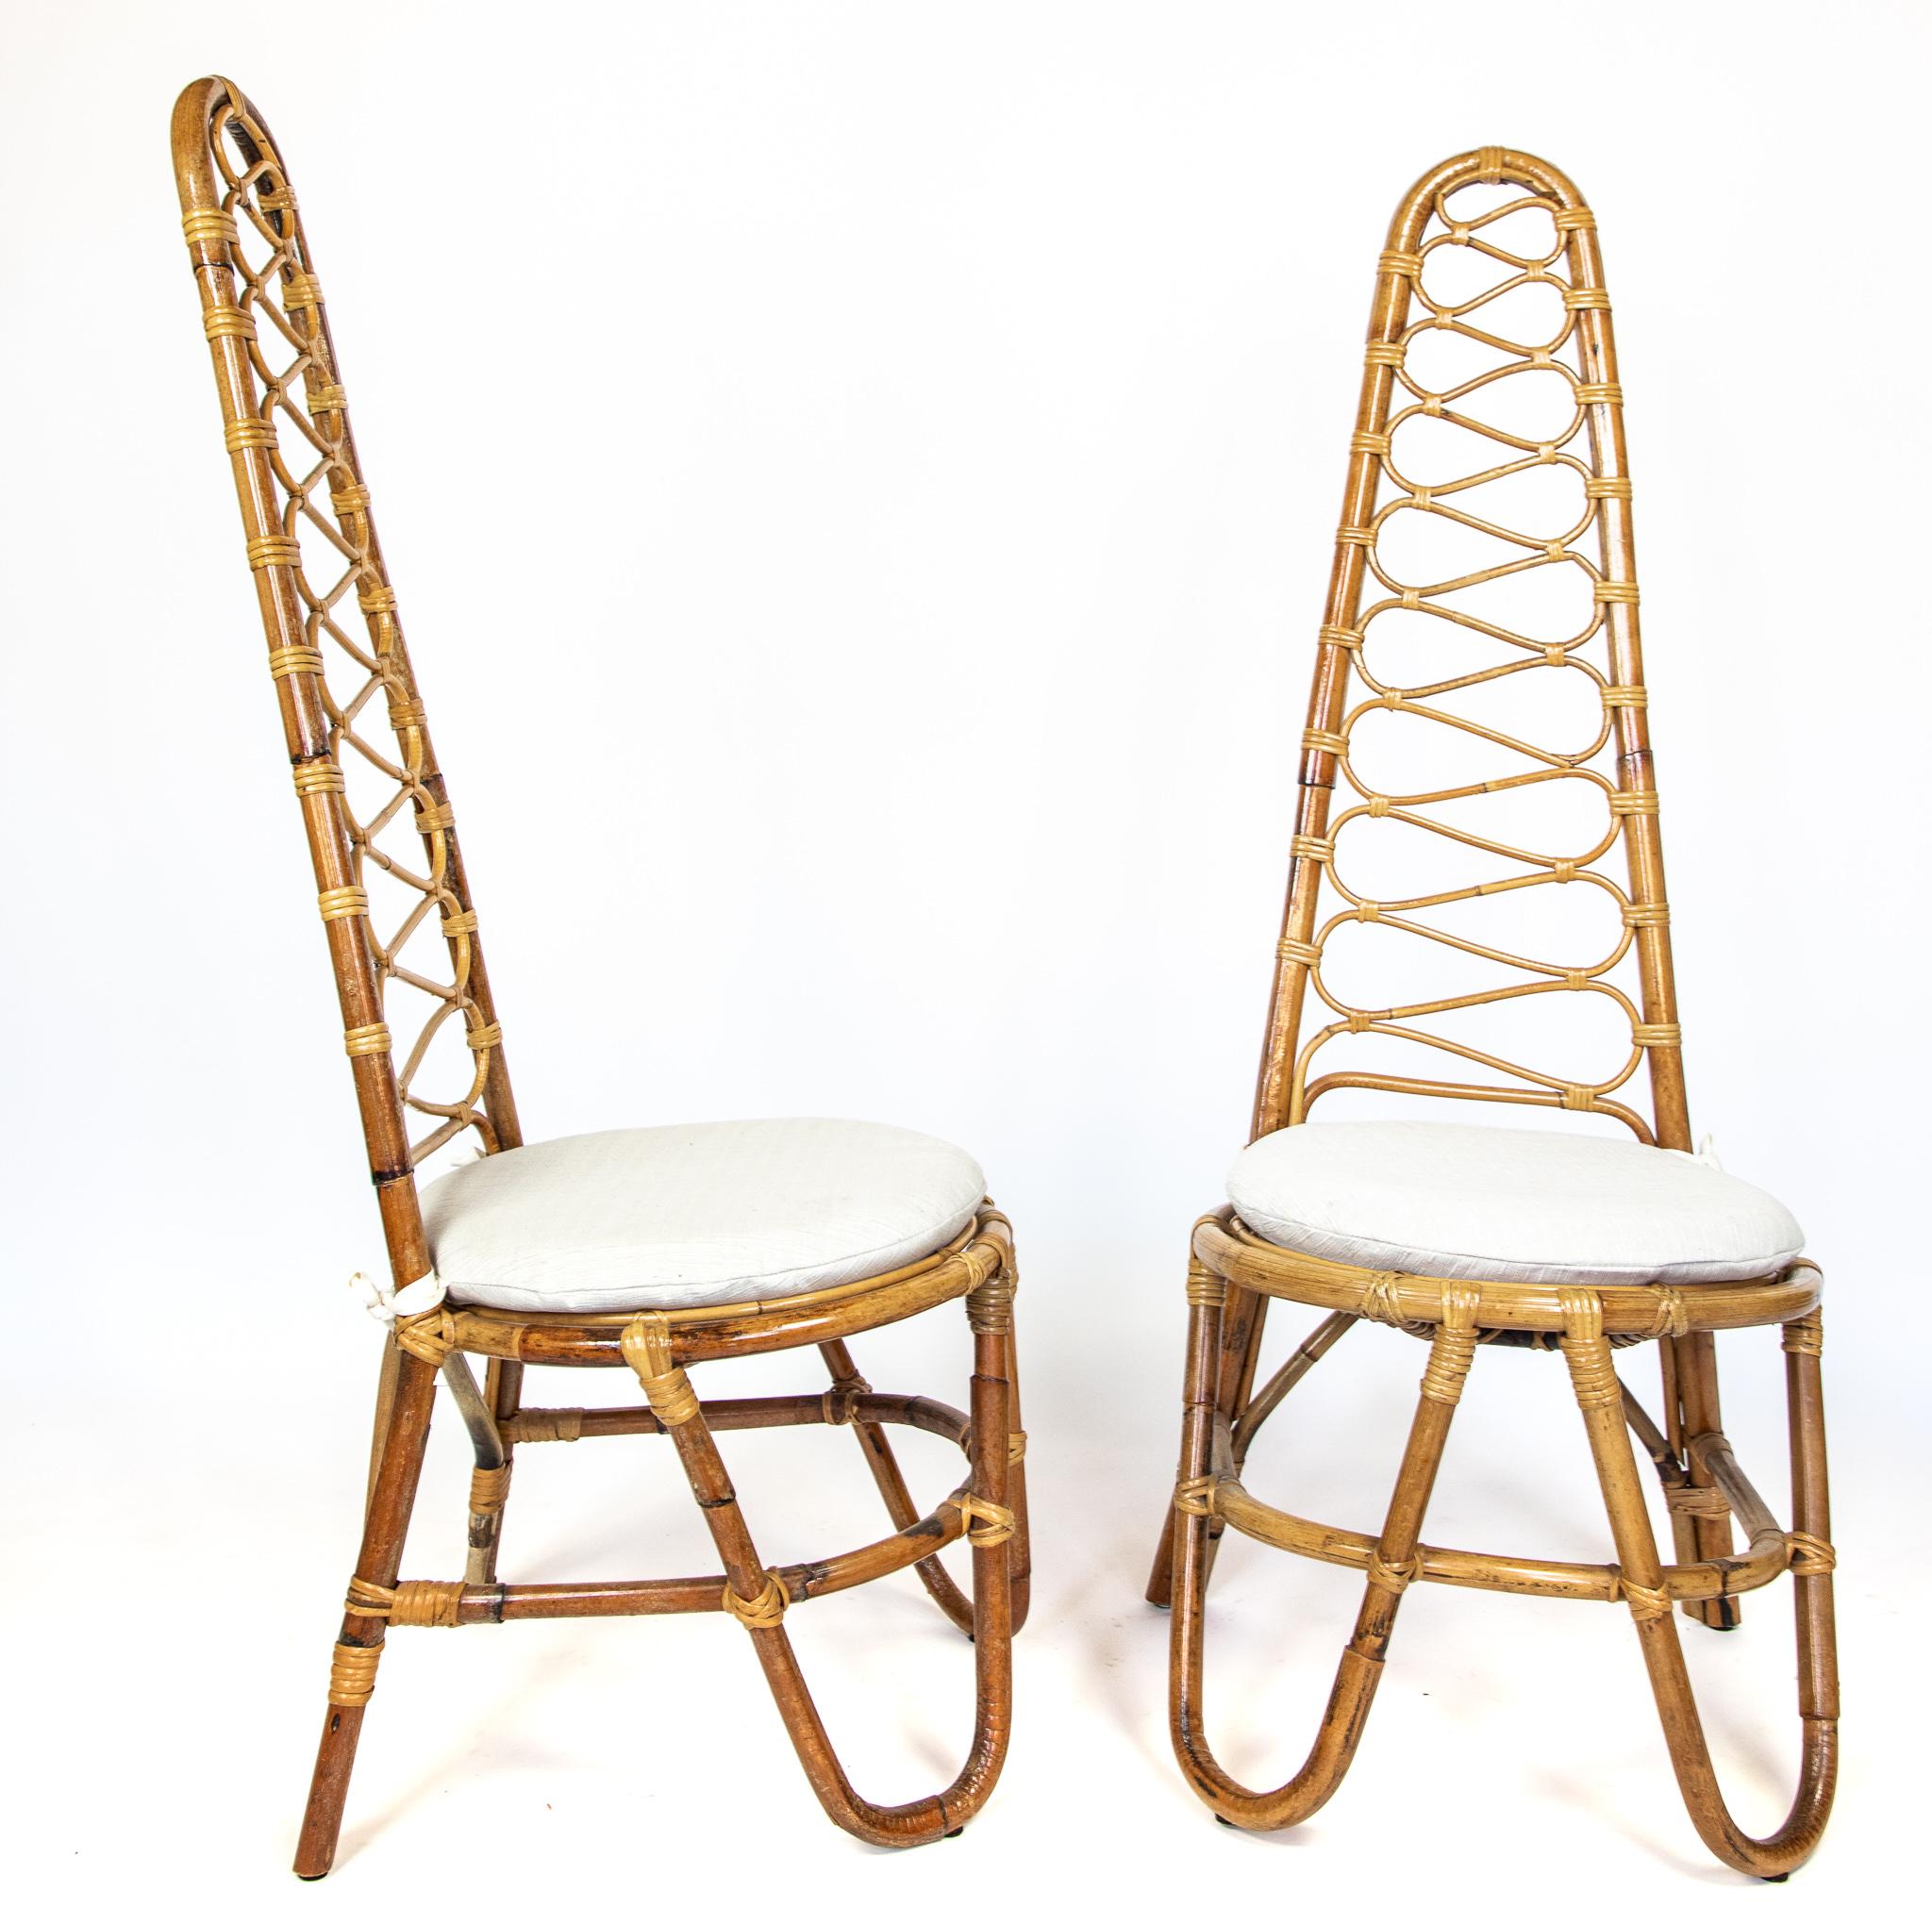 Mid-20th Century Mid-Century Modern Outdoor High Back Rattan Chairs and Table, Italy 1960s